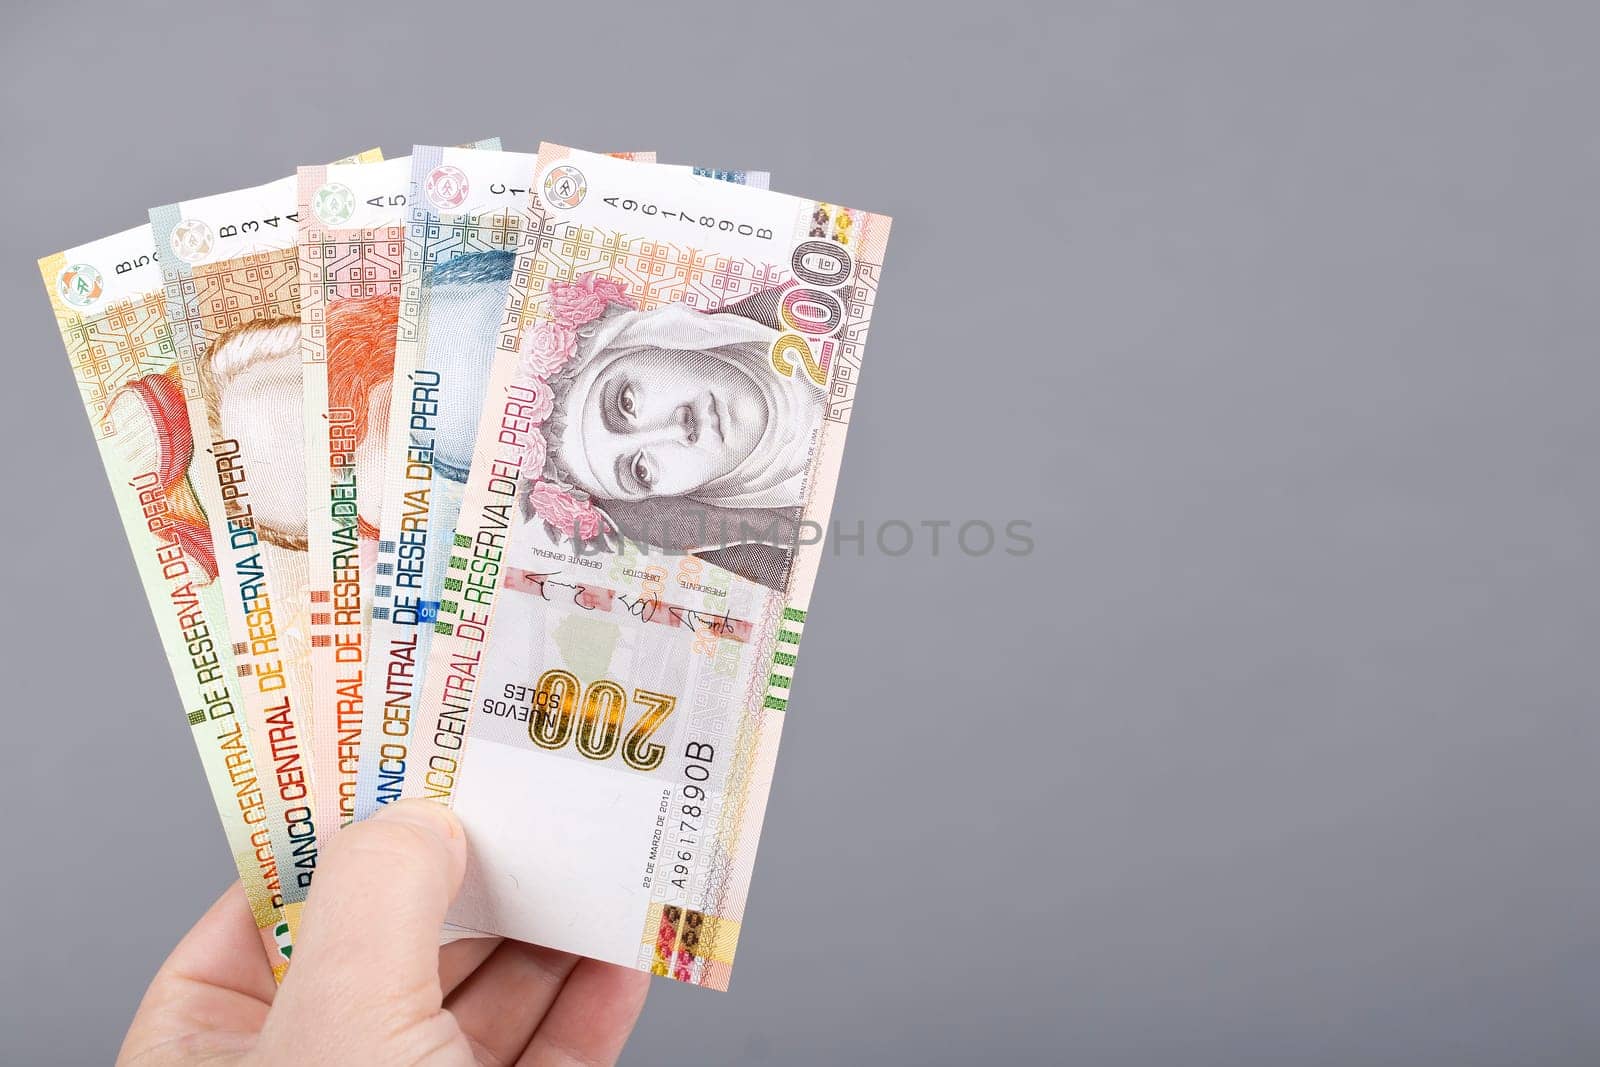 Peruvian money in the hand on a gray background by johan10